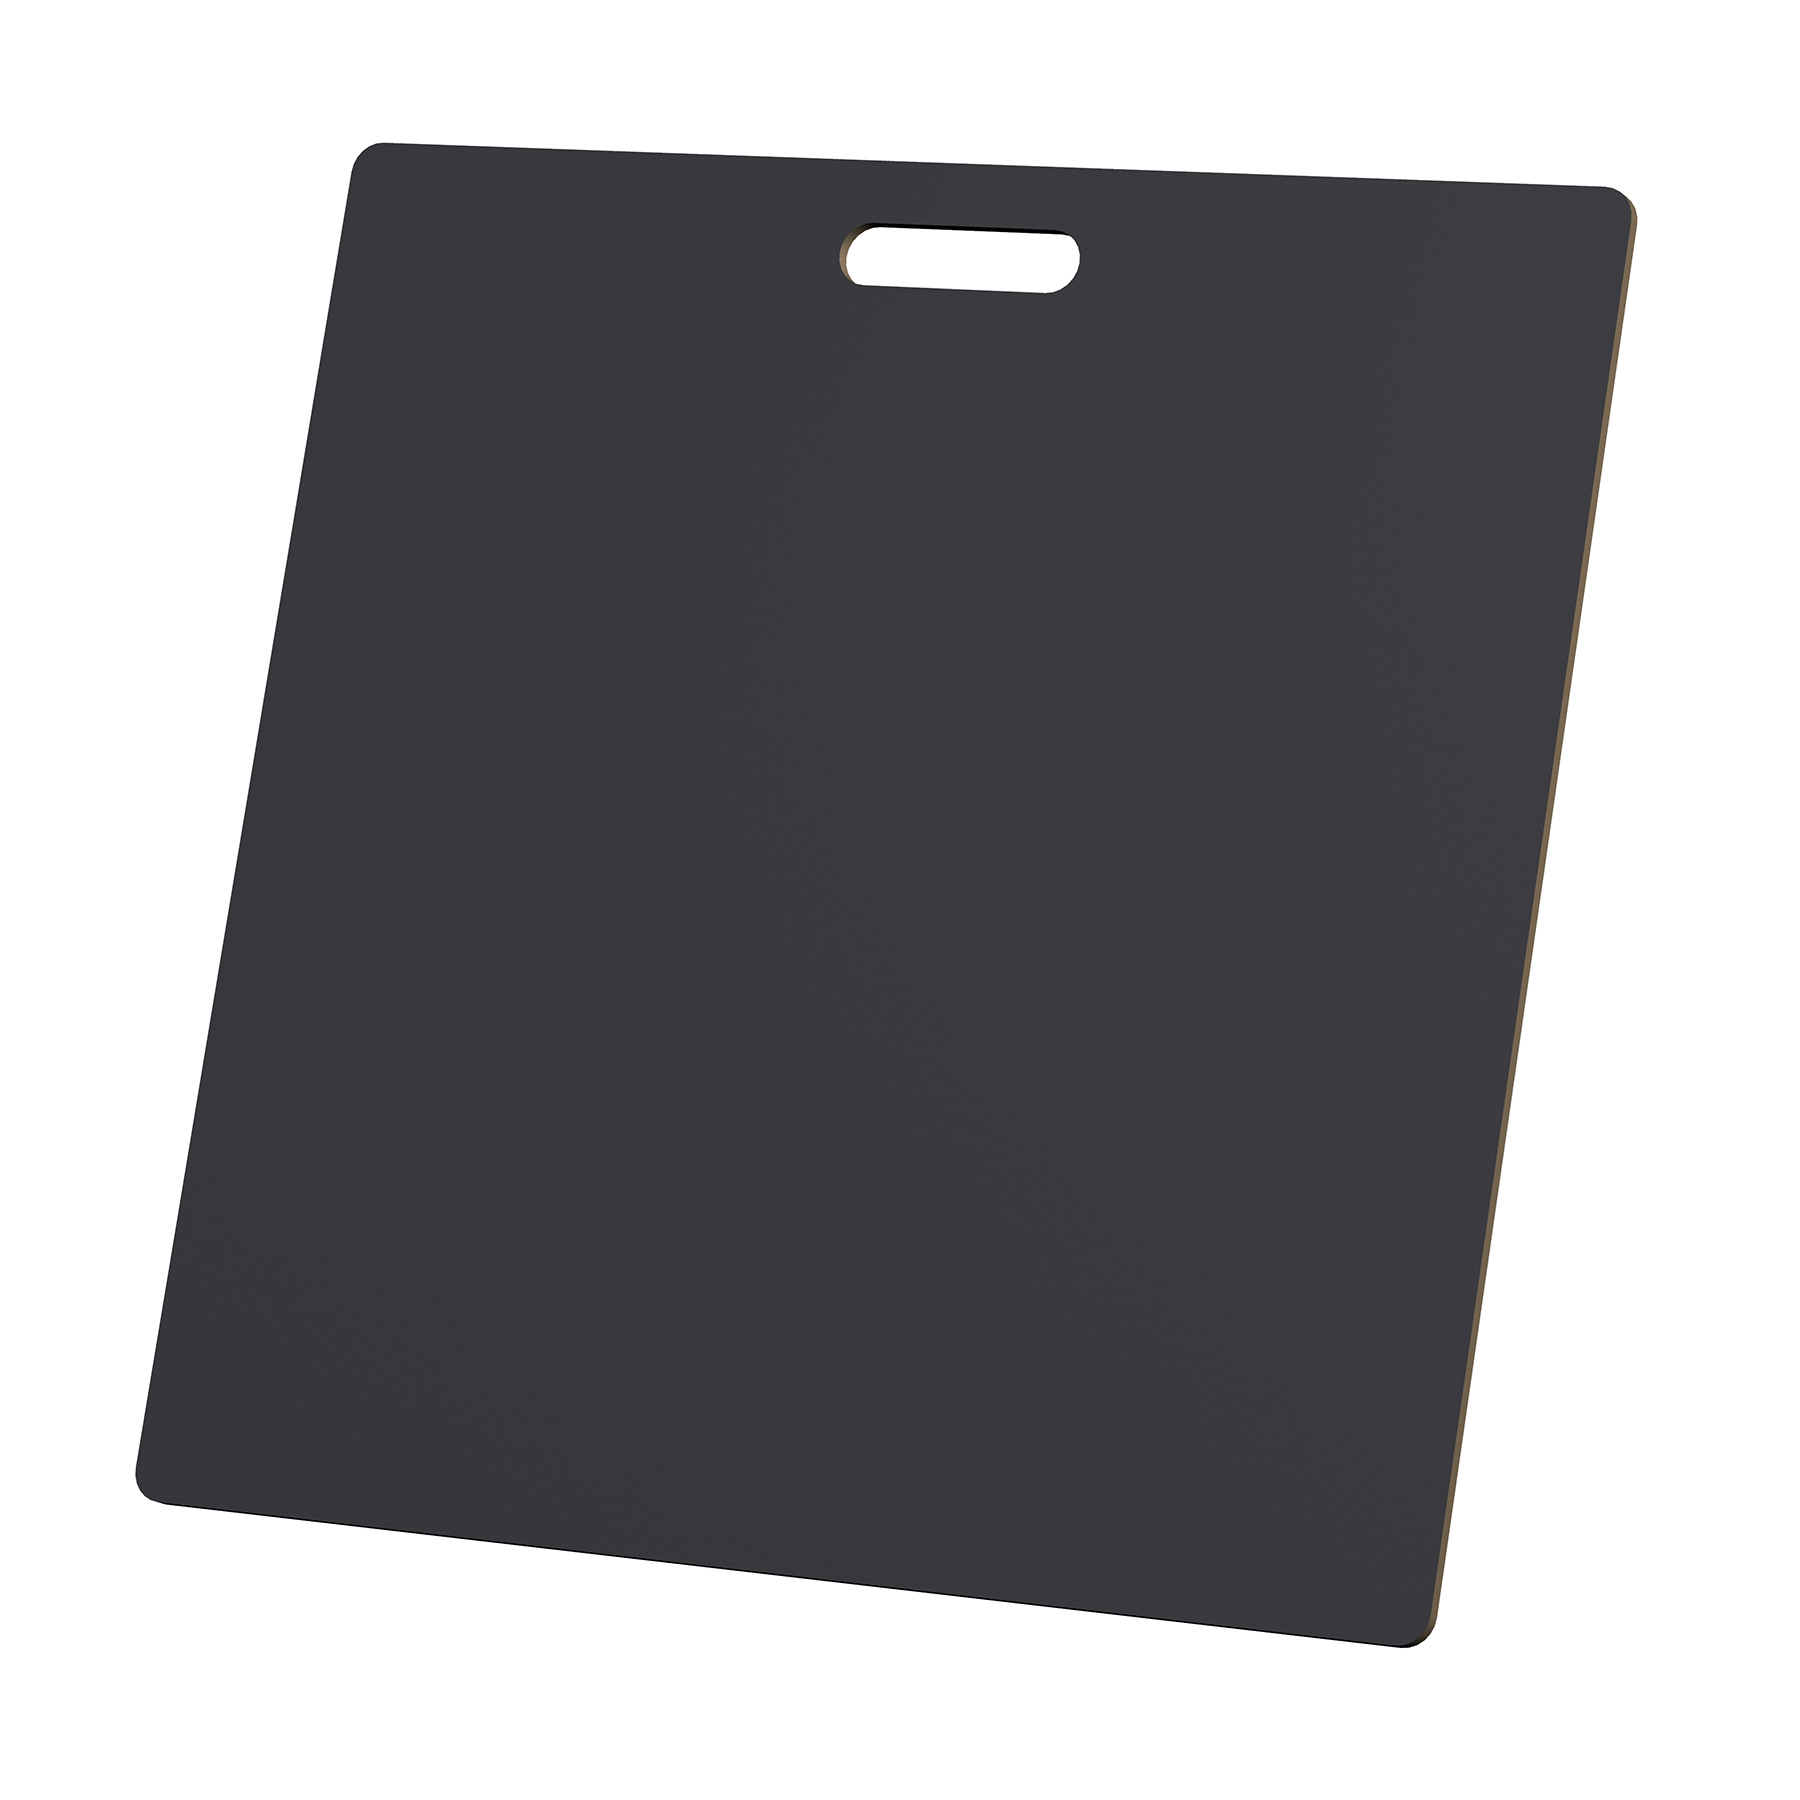 22 inch x 22 inch Black Sample Display Board for Tile Flooring Stone Wood